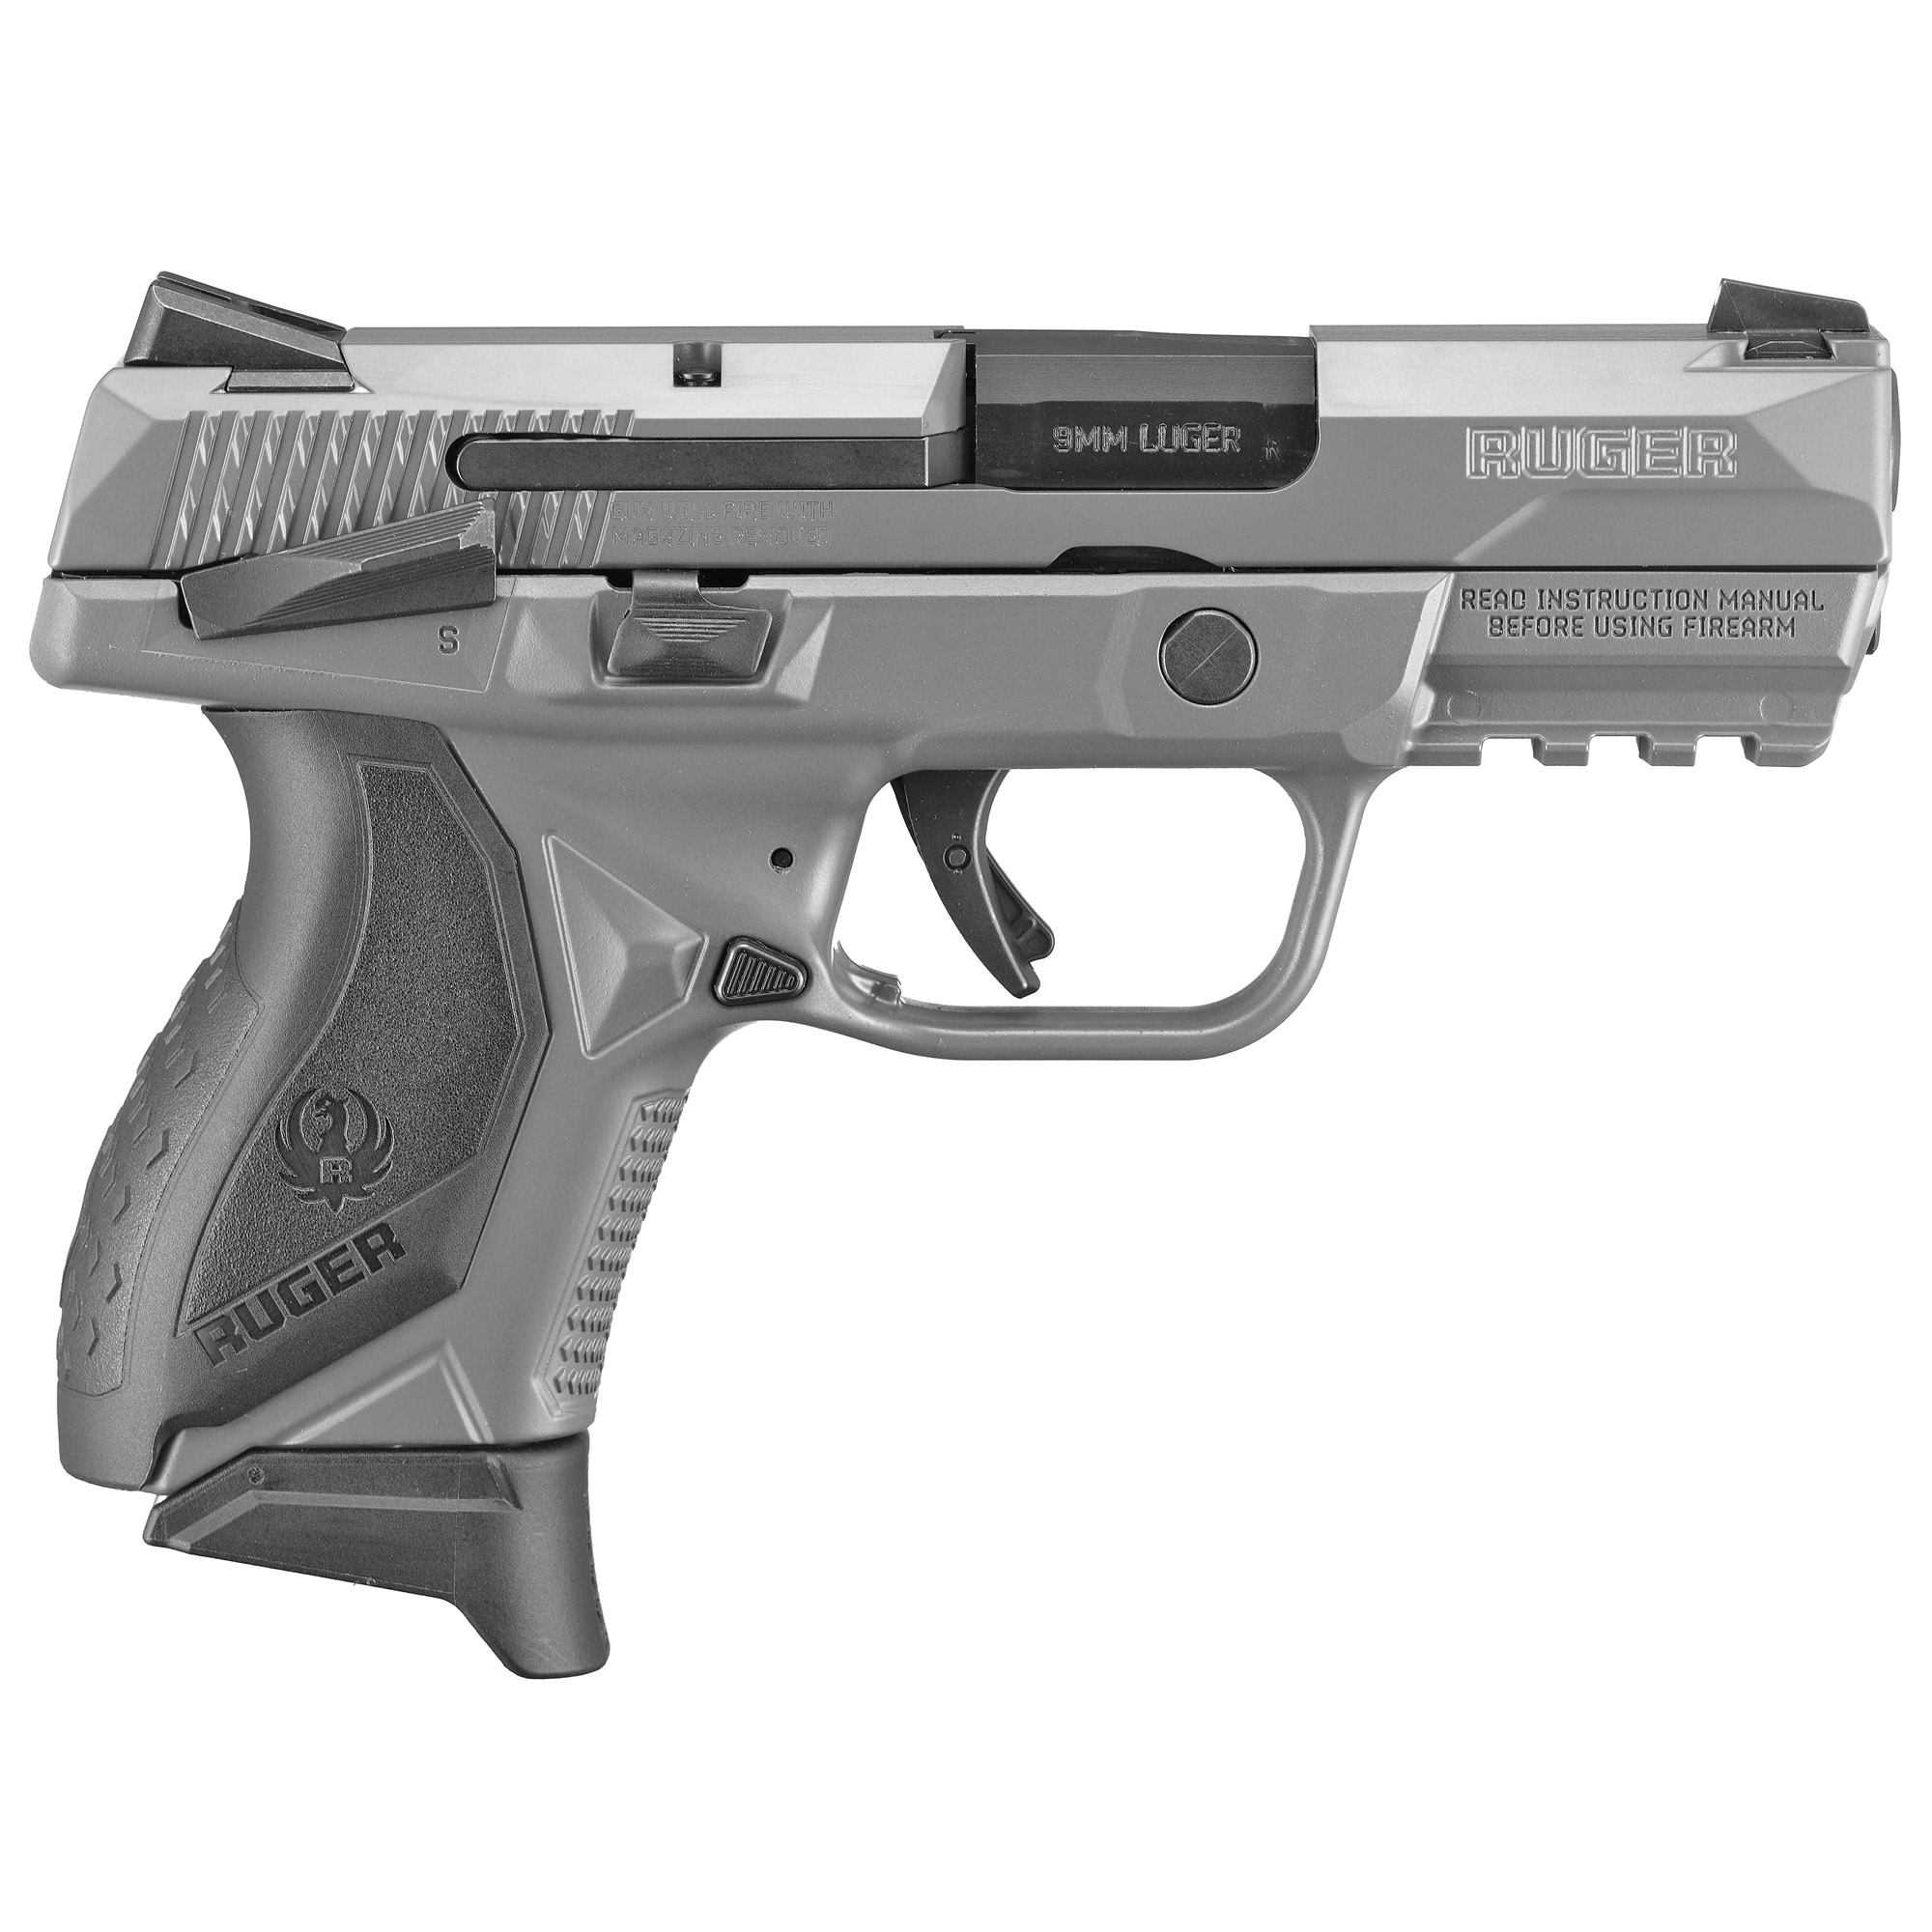 Ruger, American Compact, Striker Fired, Semi-automatic, Polymer Frame Pistol, Compact, 9MM, 3.5" Barrel, Cerakote Finish, Gray, Novak LoMount 3-Dot Sights, Ambidextrous Manual Safety, 17 Rounds, 2 Magazines, (1)-17 Rounds and (1)-12 Rounds, Ambidextrous